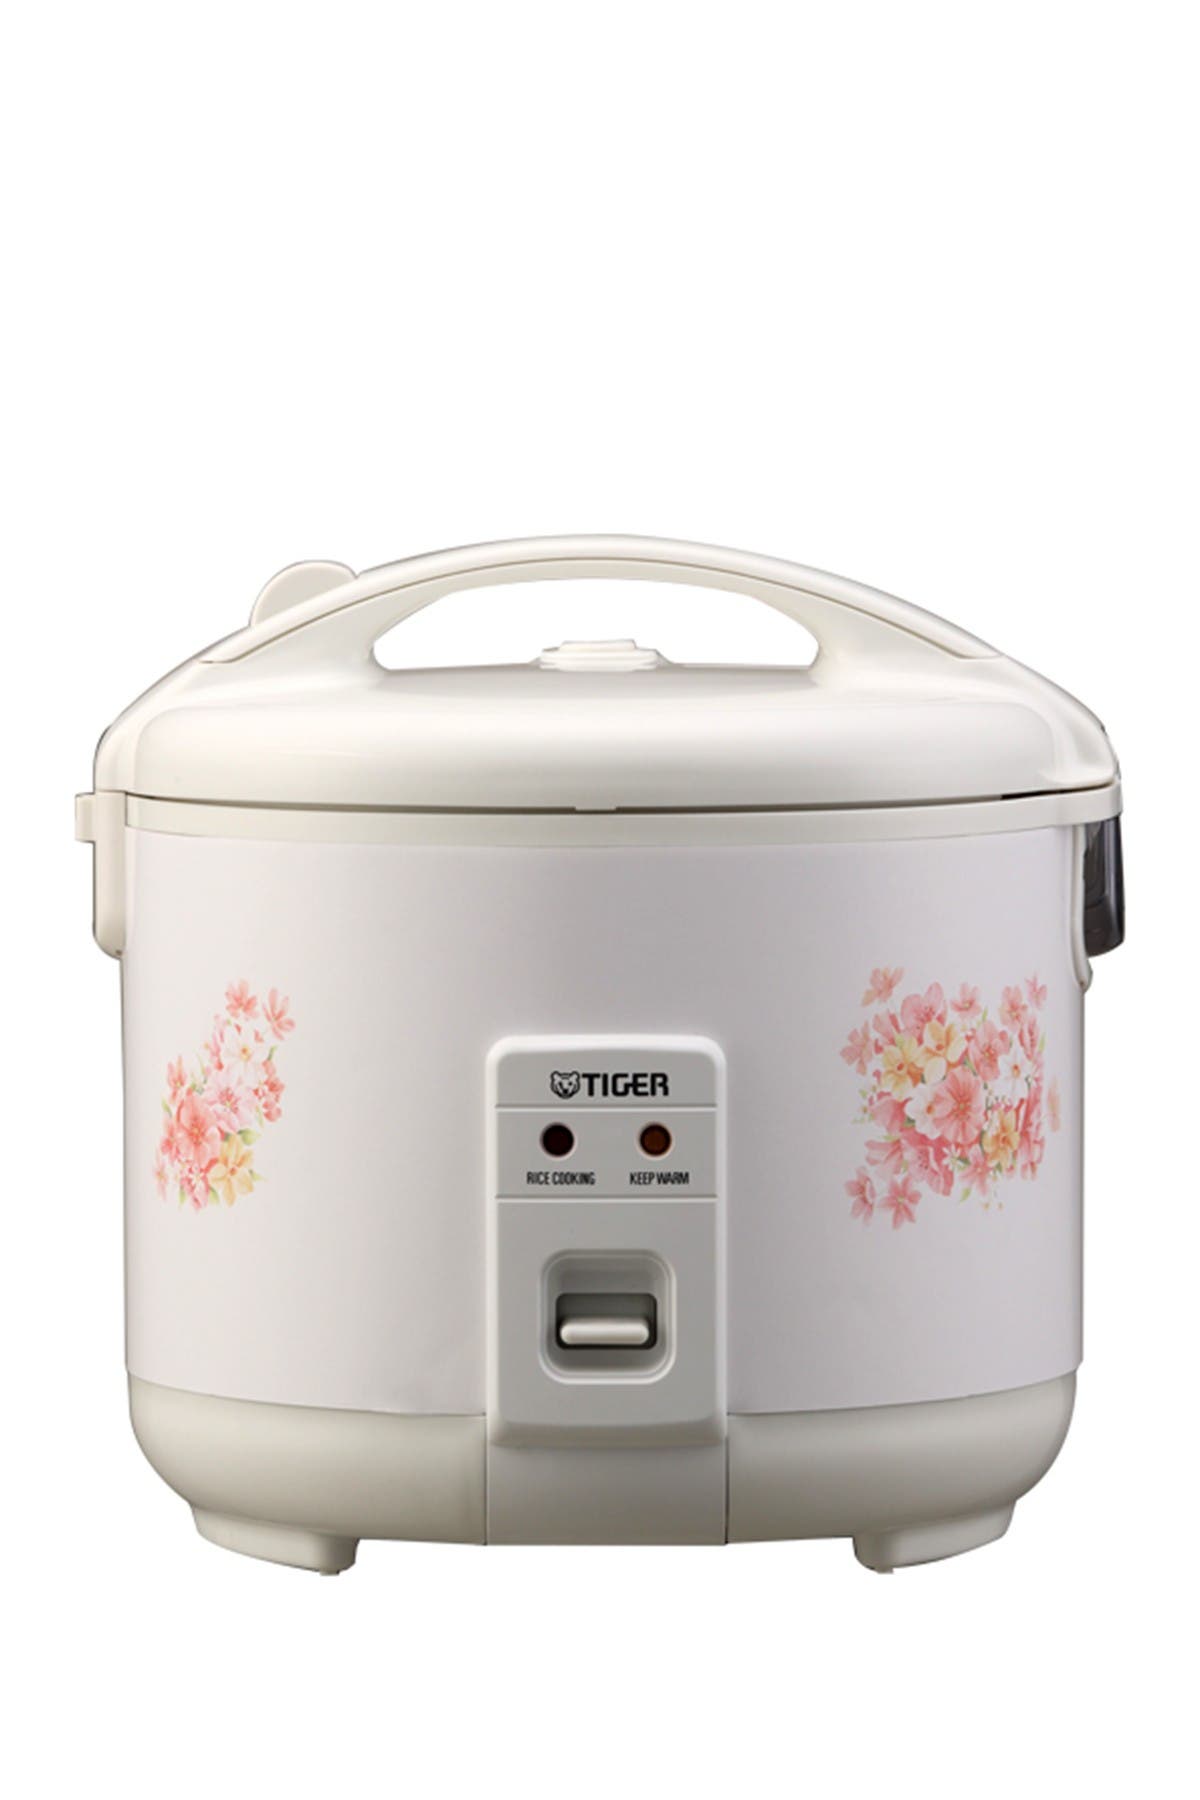 White for sale online Tiger JNP-1000-FL 5.5 Cup Electronic Rice Cooker and Warmer 